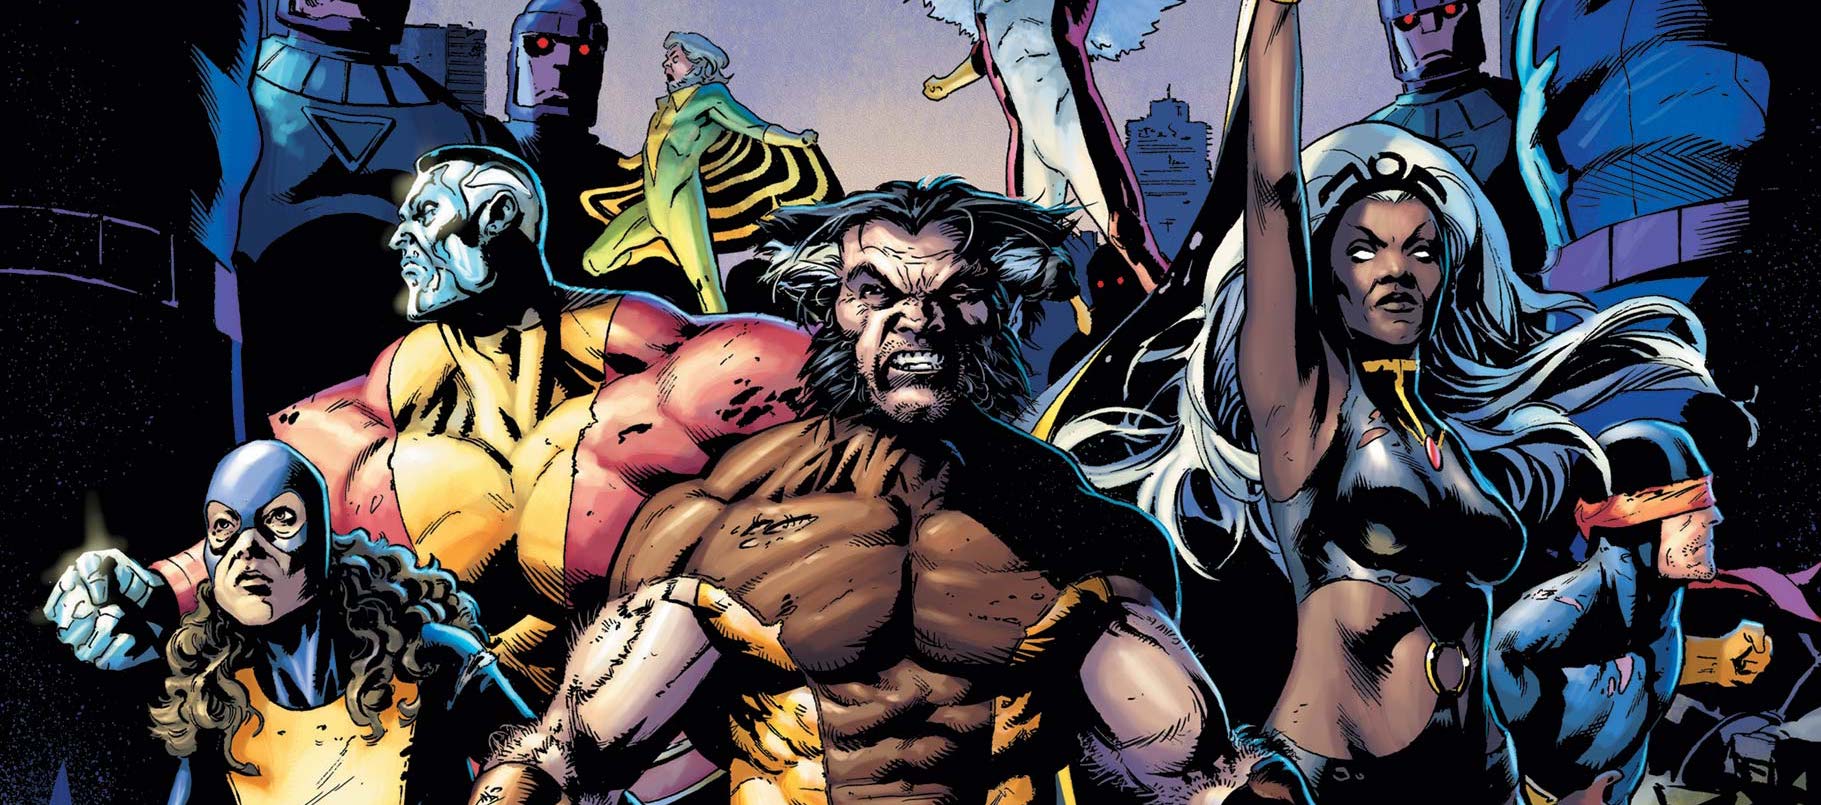 'X-Men: Days of Future Past - Doomsday' #1 is off to a solid start